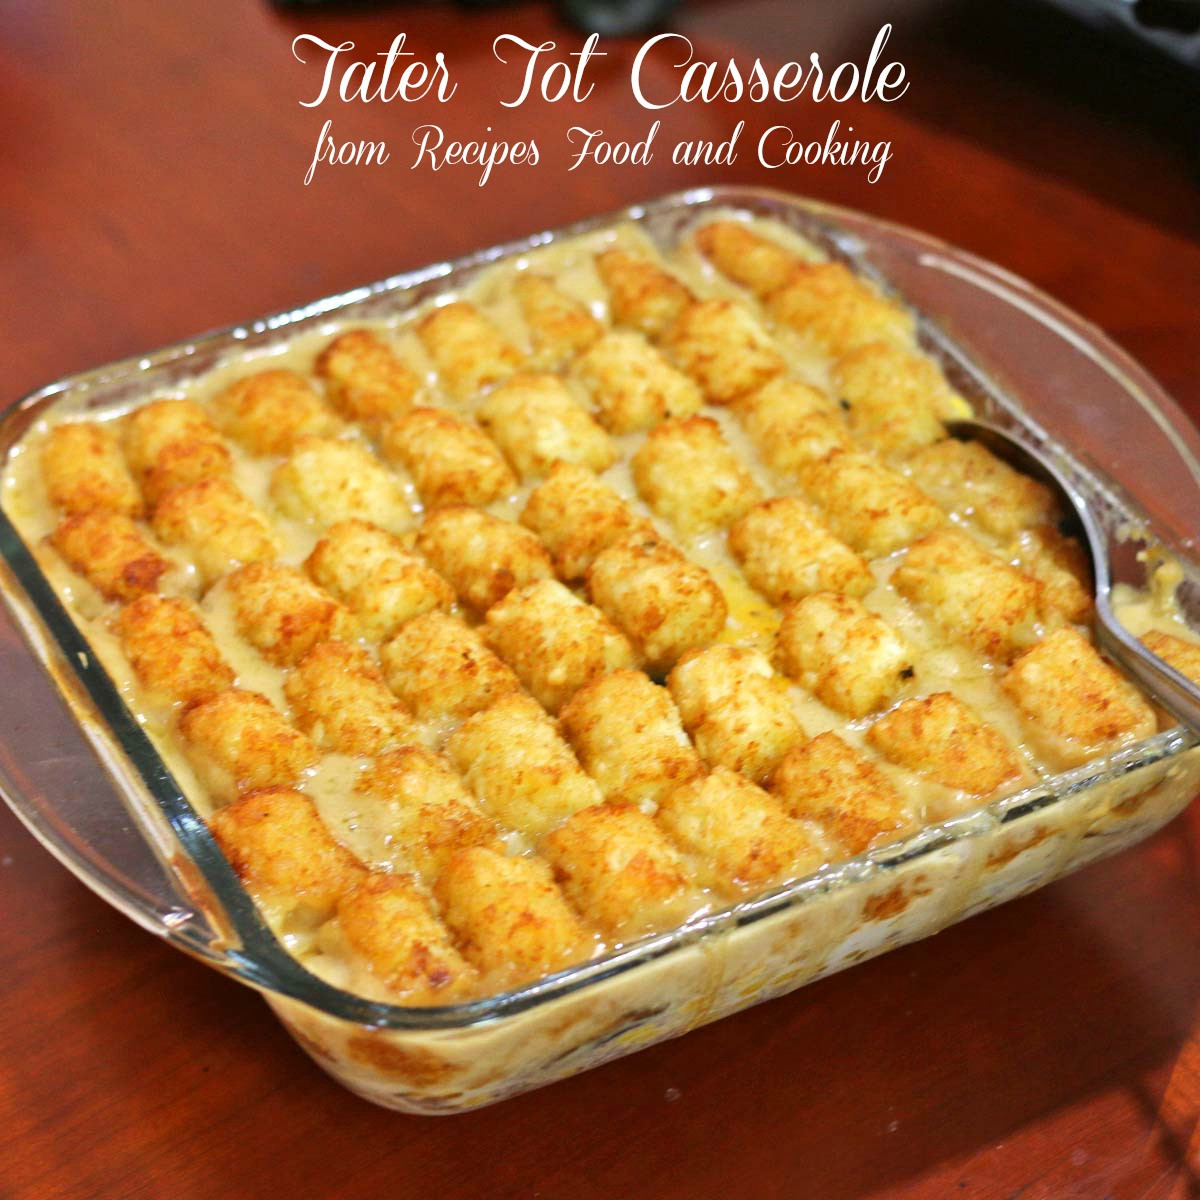 Hamburger Casserole With Tater Tots
 Tater Tot Casserole Recipes Food and Cooking